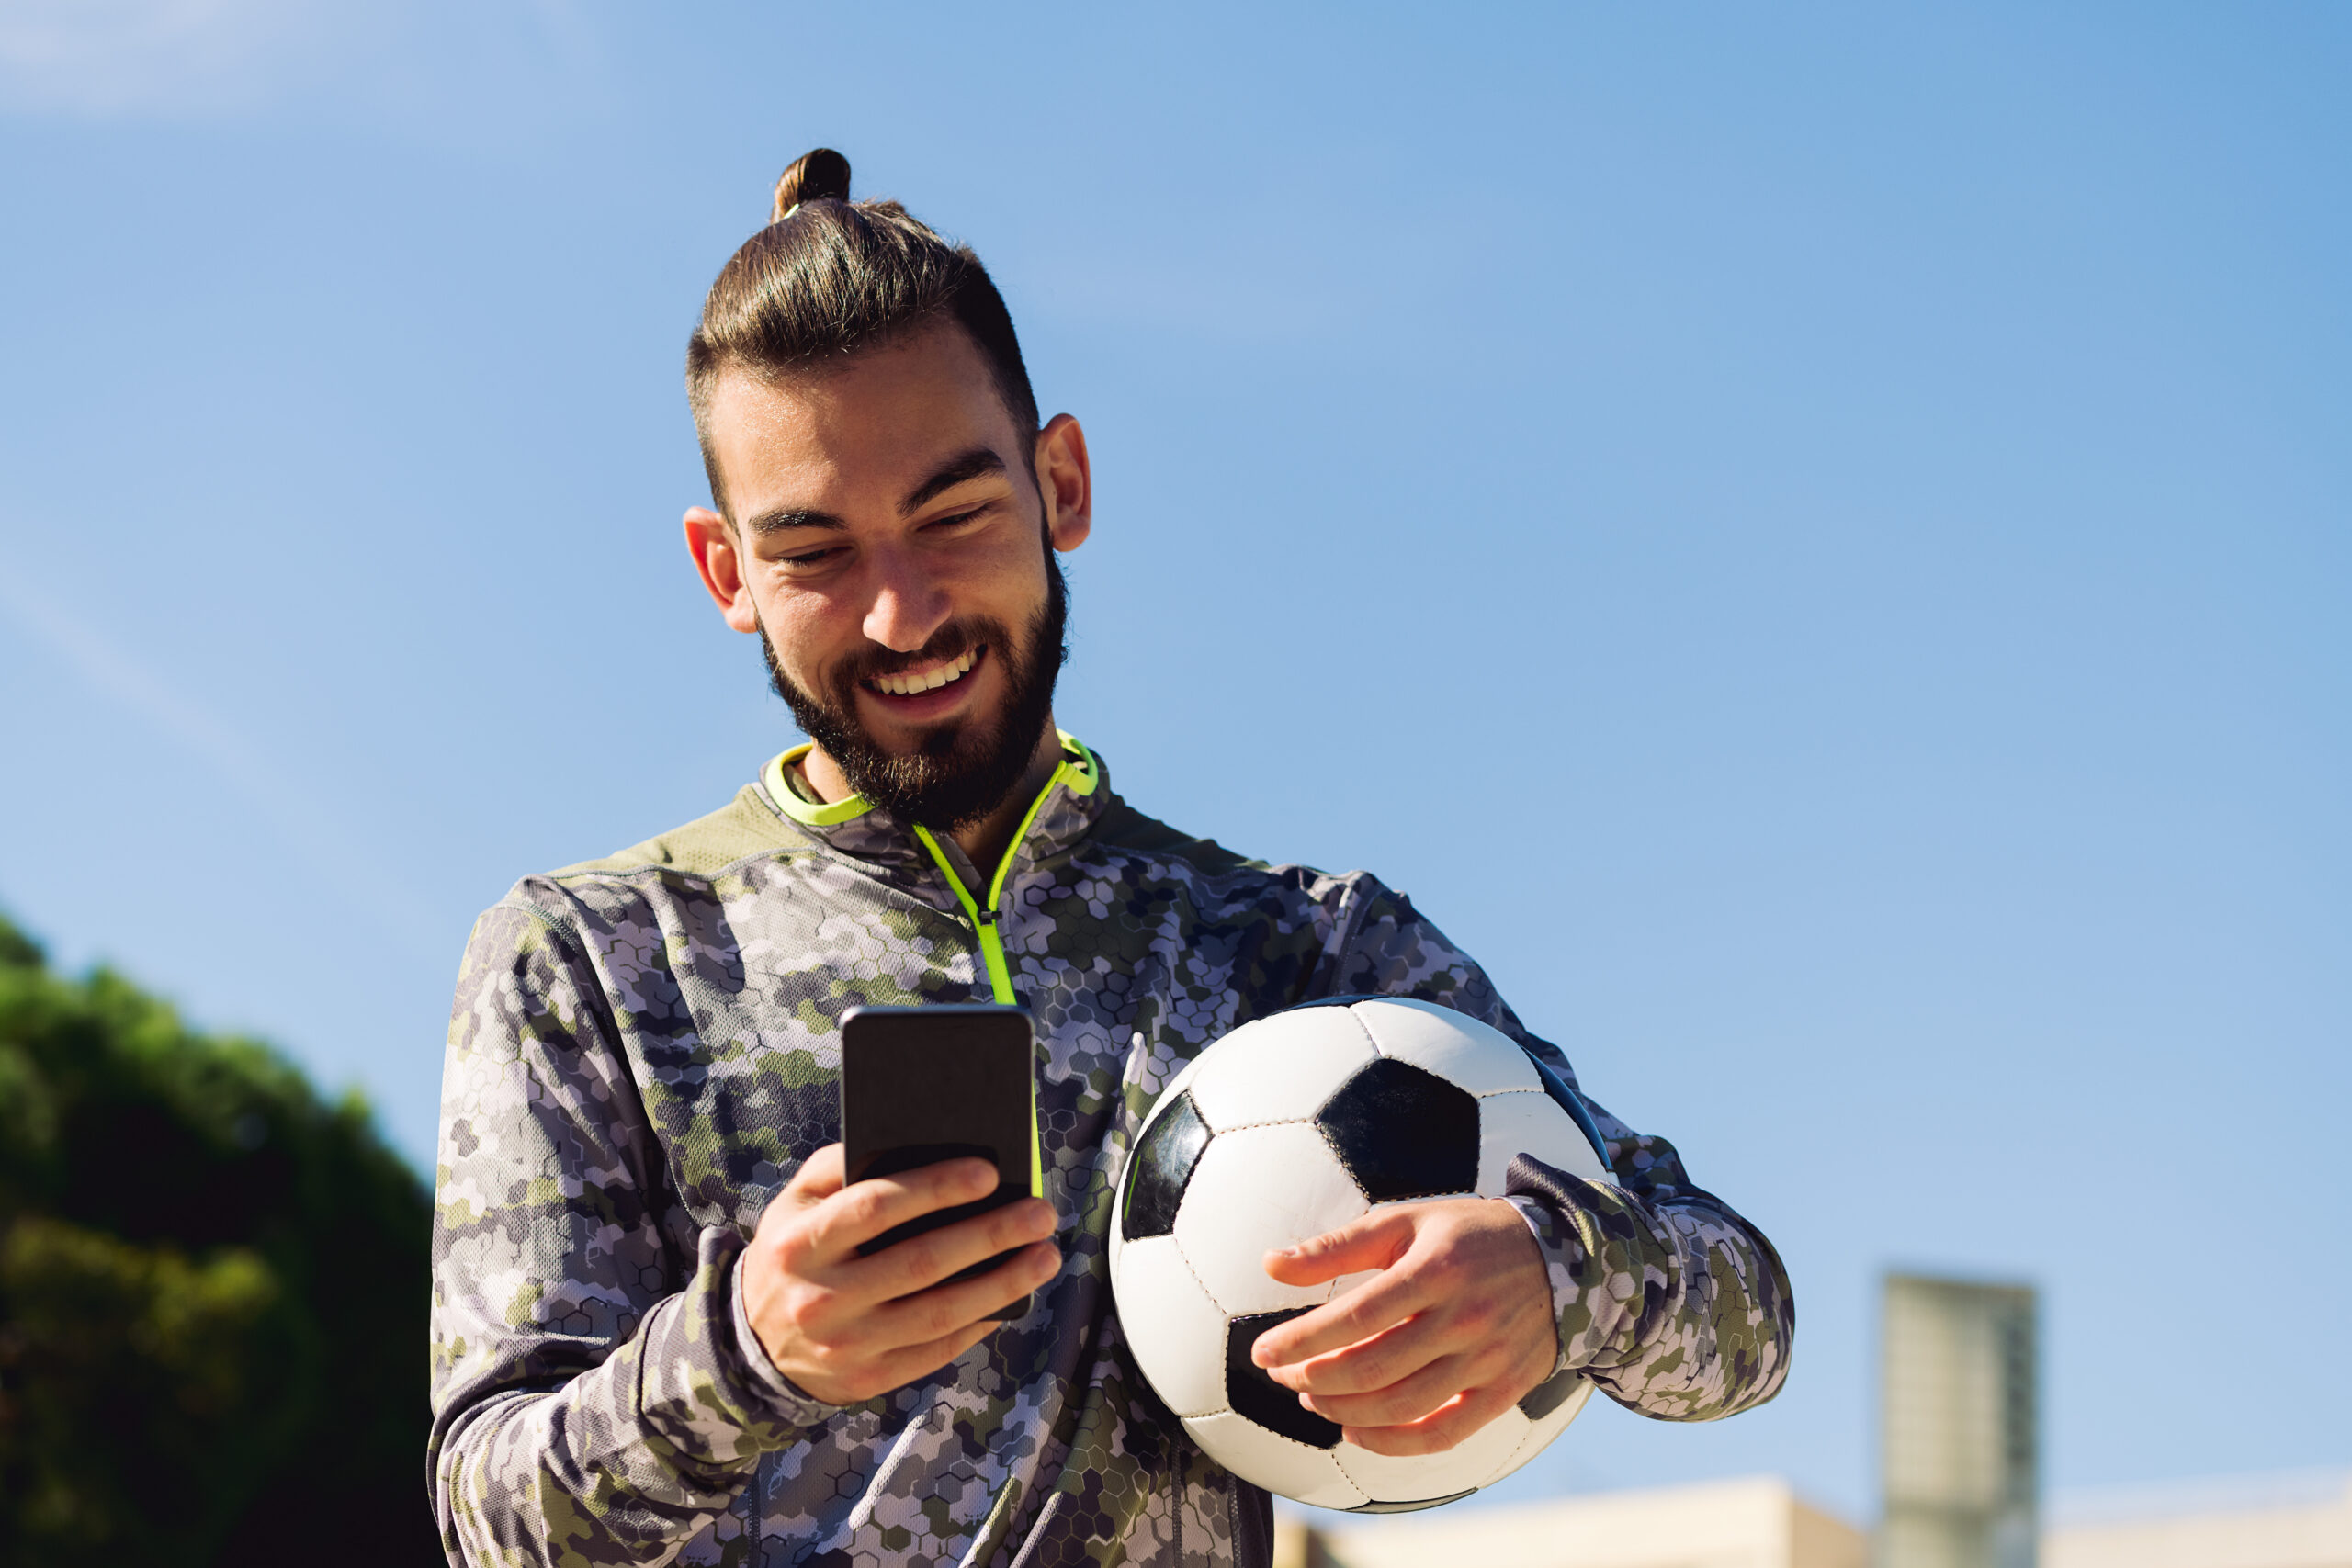 smiling athletic young man holding a football while using his mobile phone